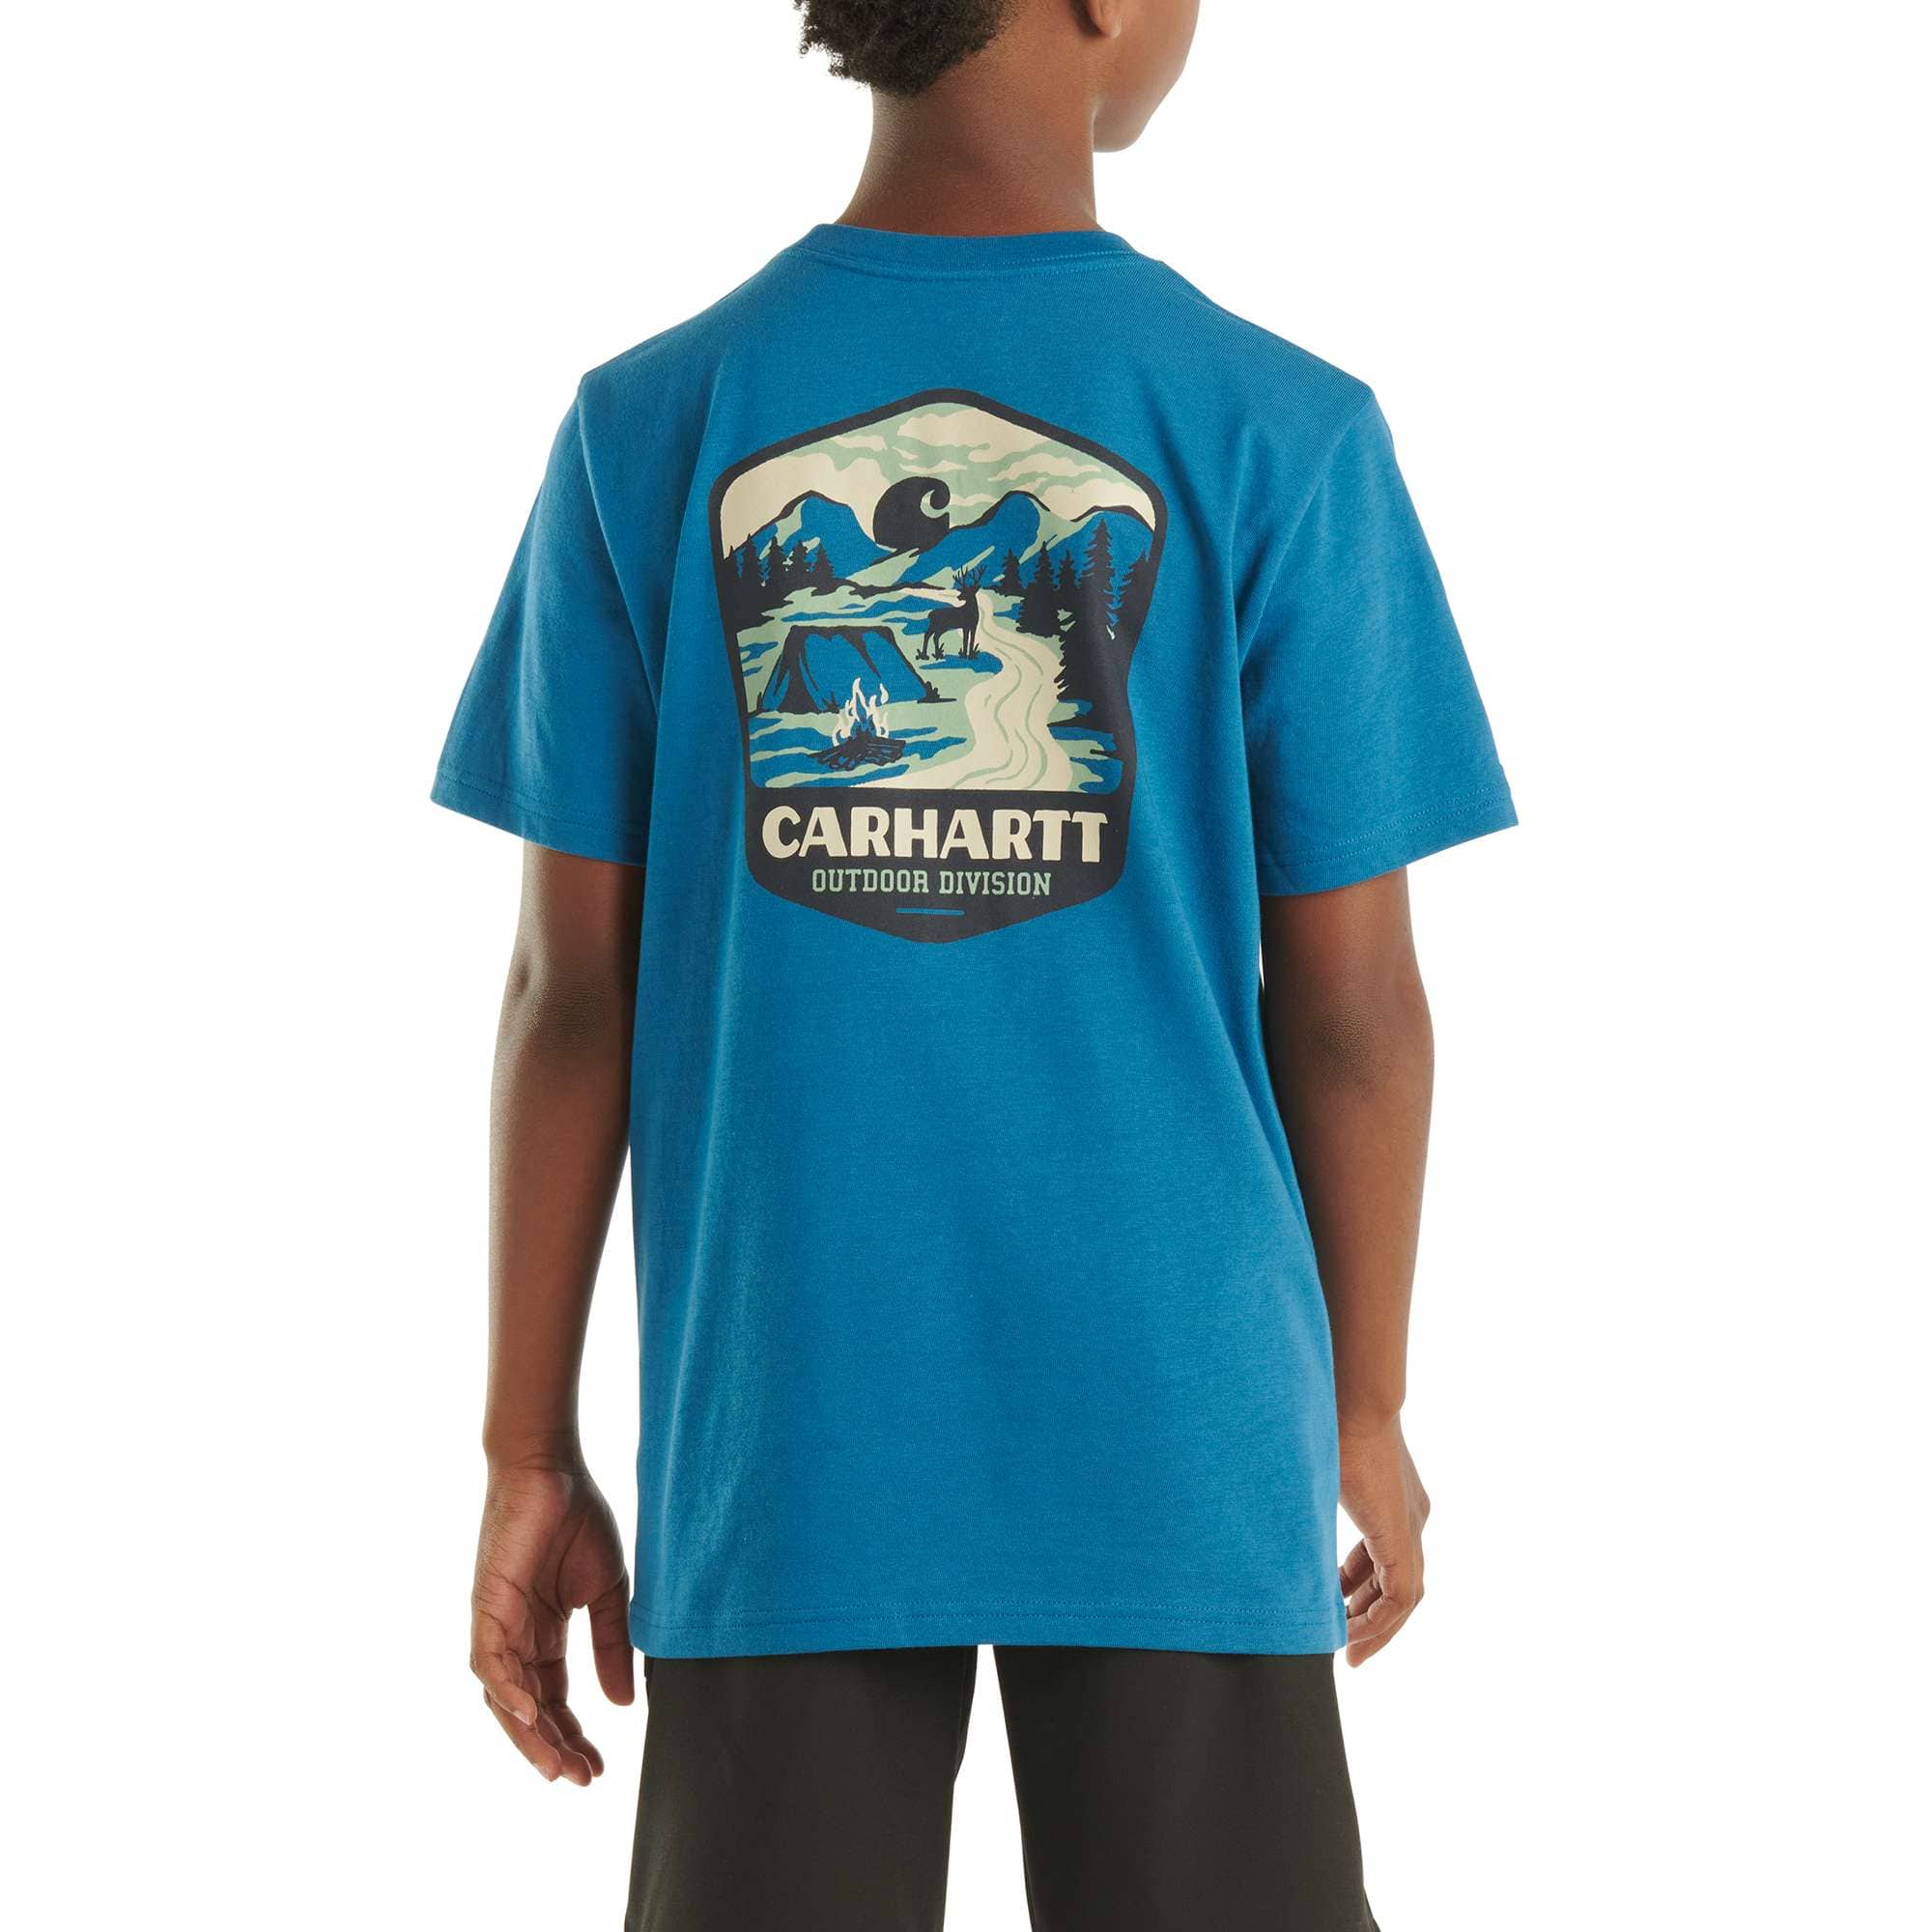 Boys' Short-Sleeve Outdoor T-Shirt (Child/Youth)